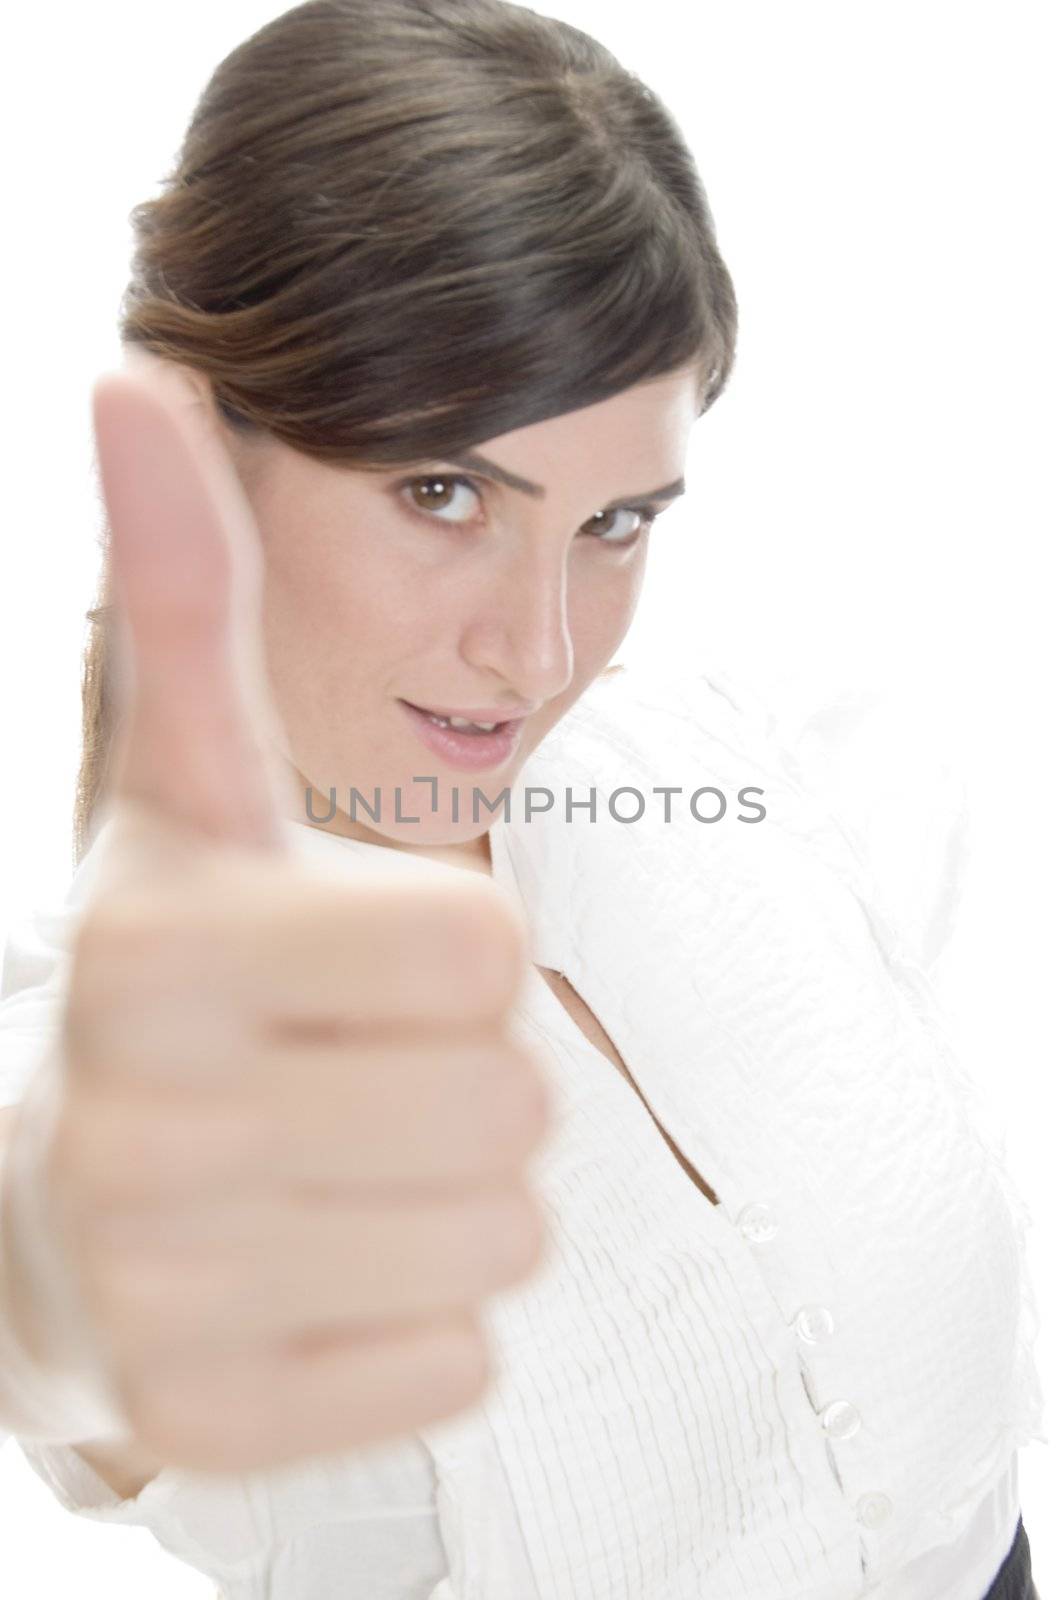 smiling lady showing approval sign against white background